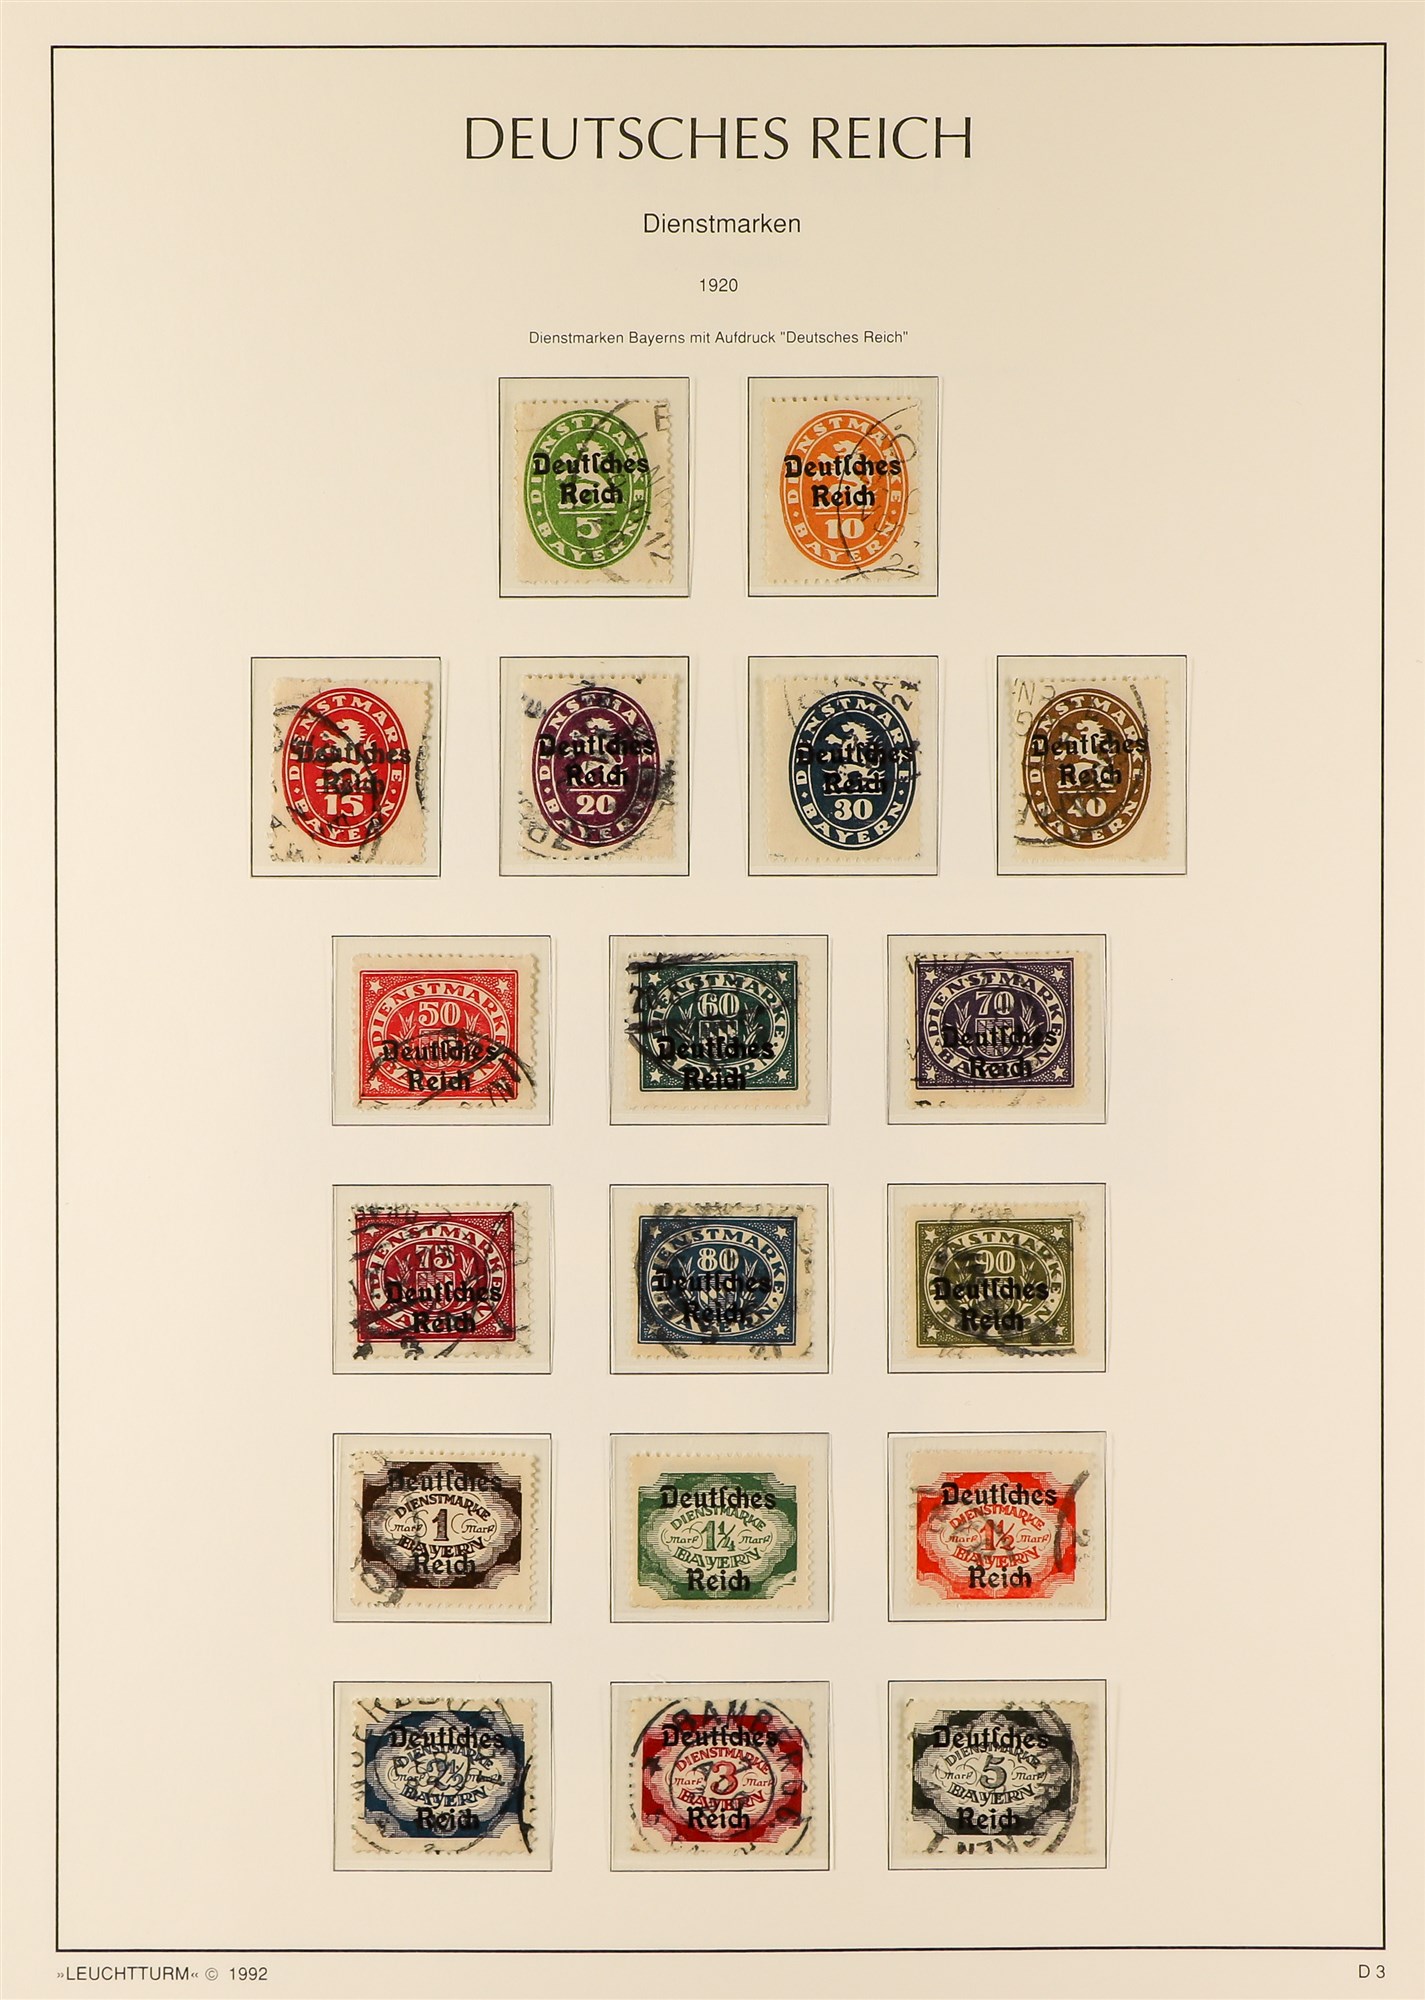 GERMANY OFFICIAL STAMPS 1903 - 1944 COLLECTION of used stamps, near- complete for the period, s.t. - Image 2 of 5